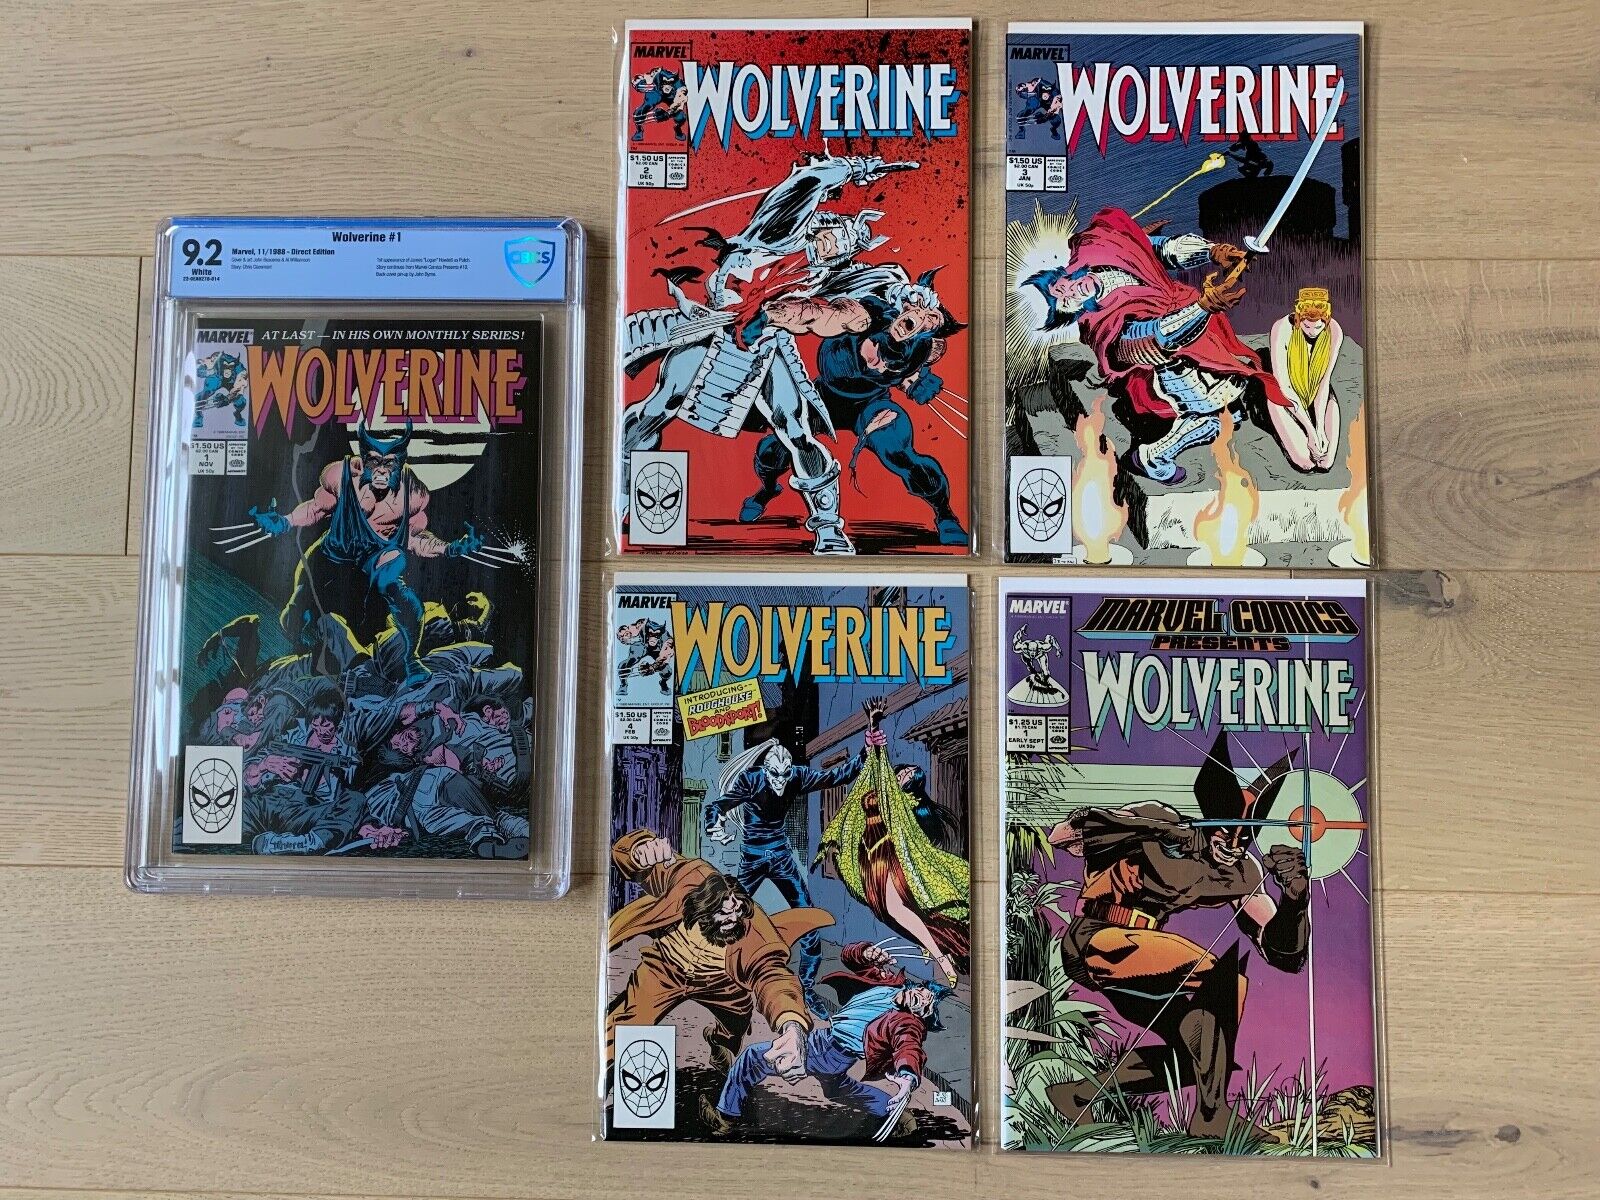 Wolverine #1 (First Marvel Ongoing Series) - 1988 comic lot #1-4+